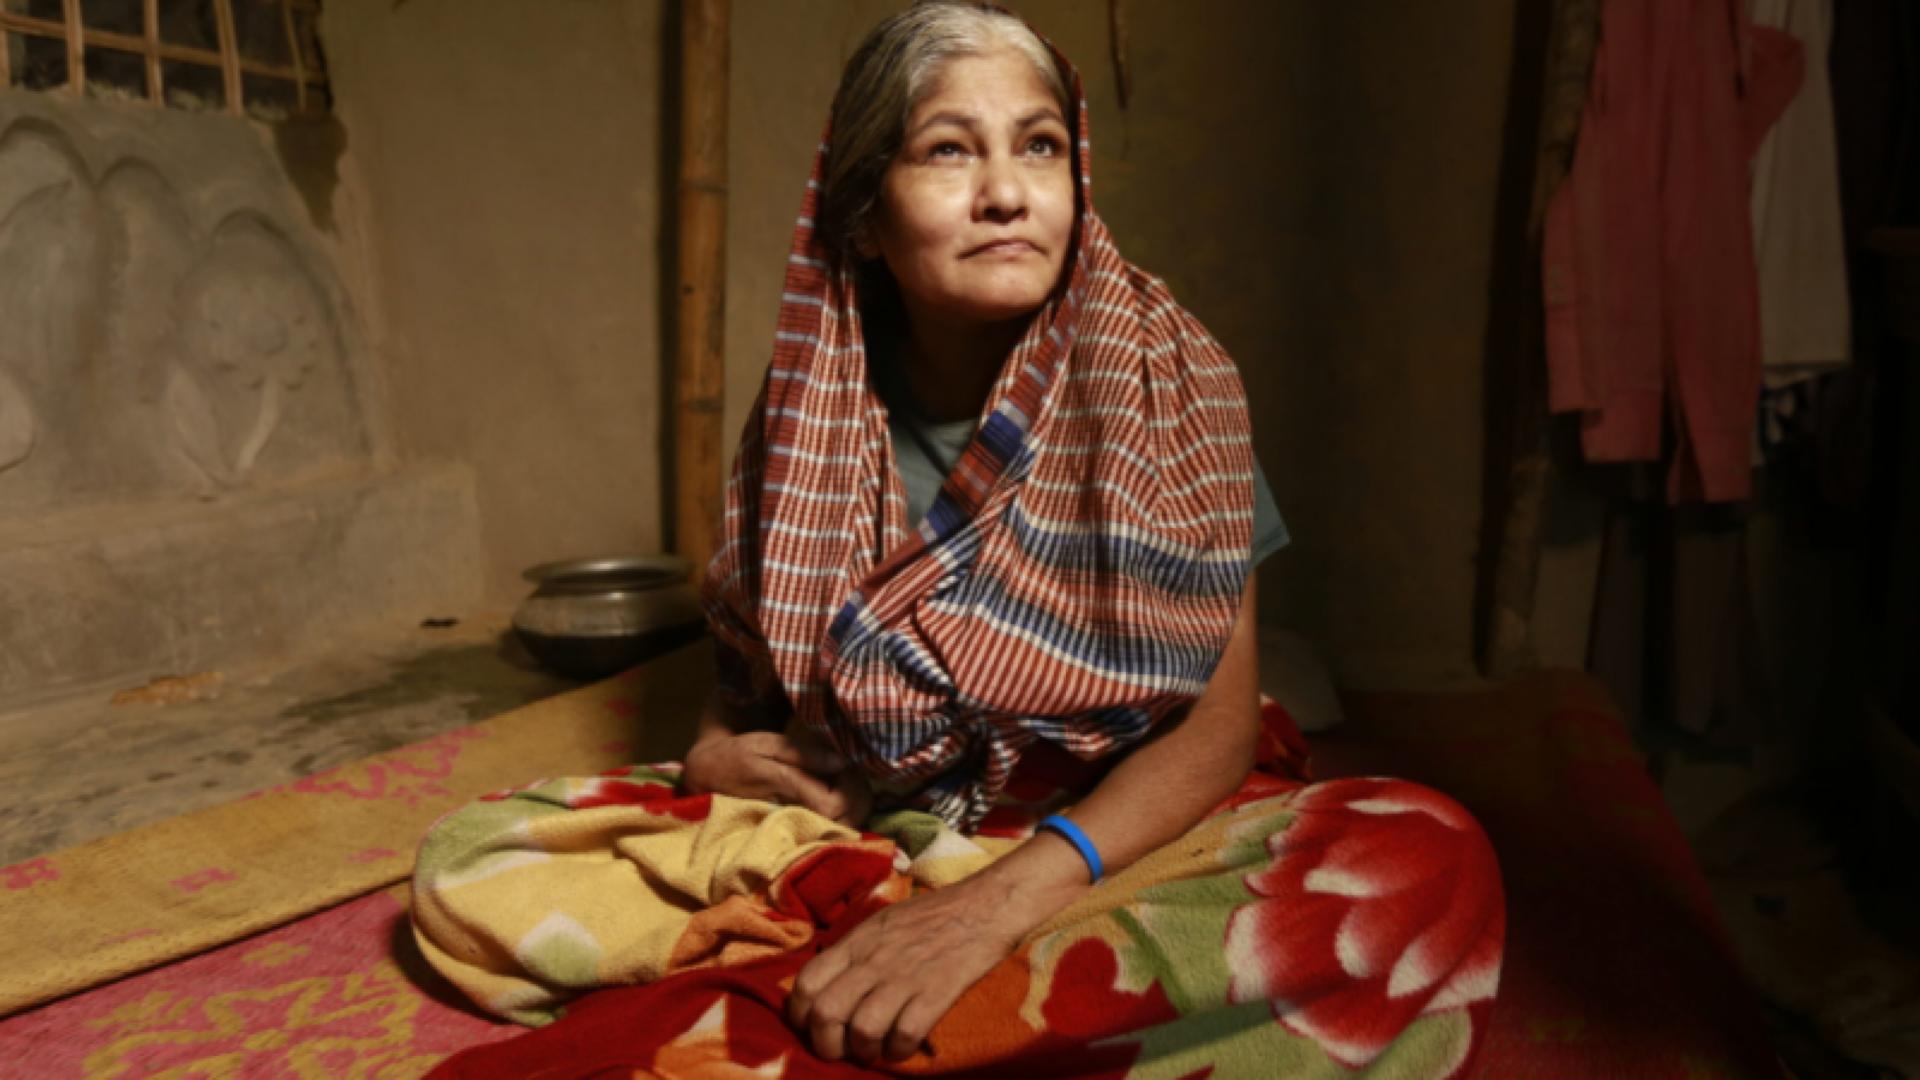 This photo shows an old woman with a physical disability sitting in a house.